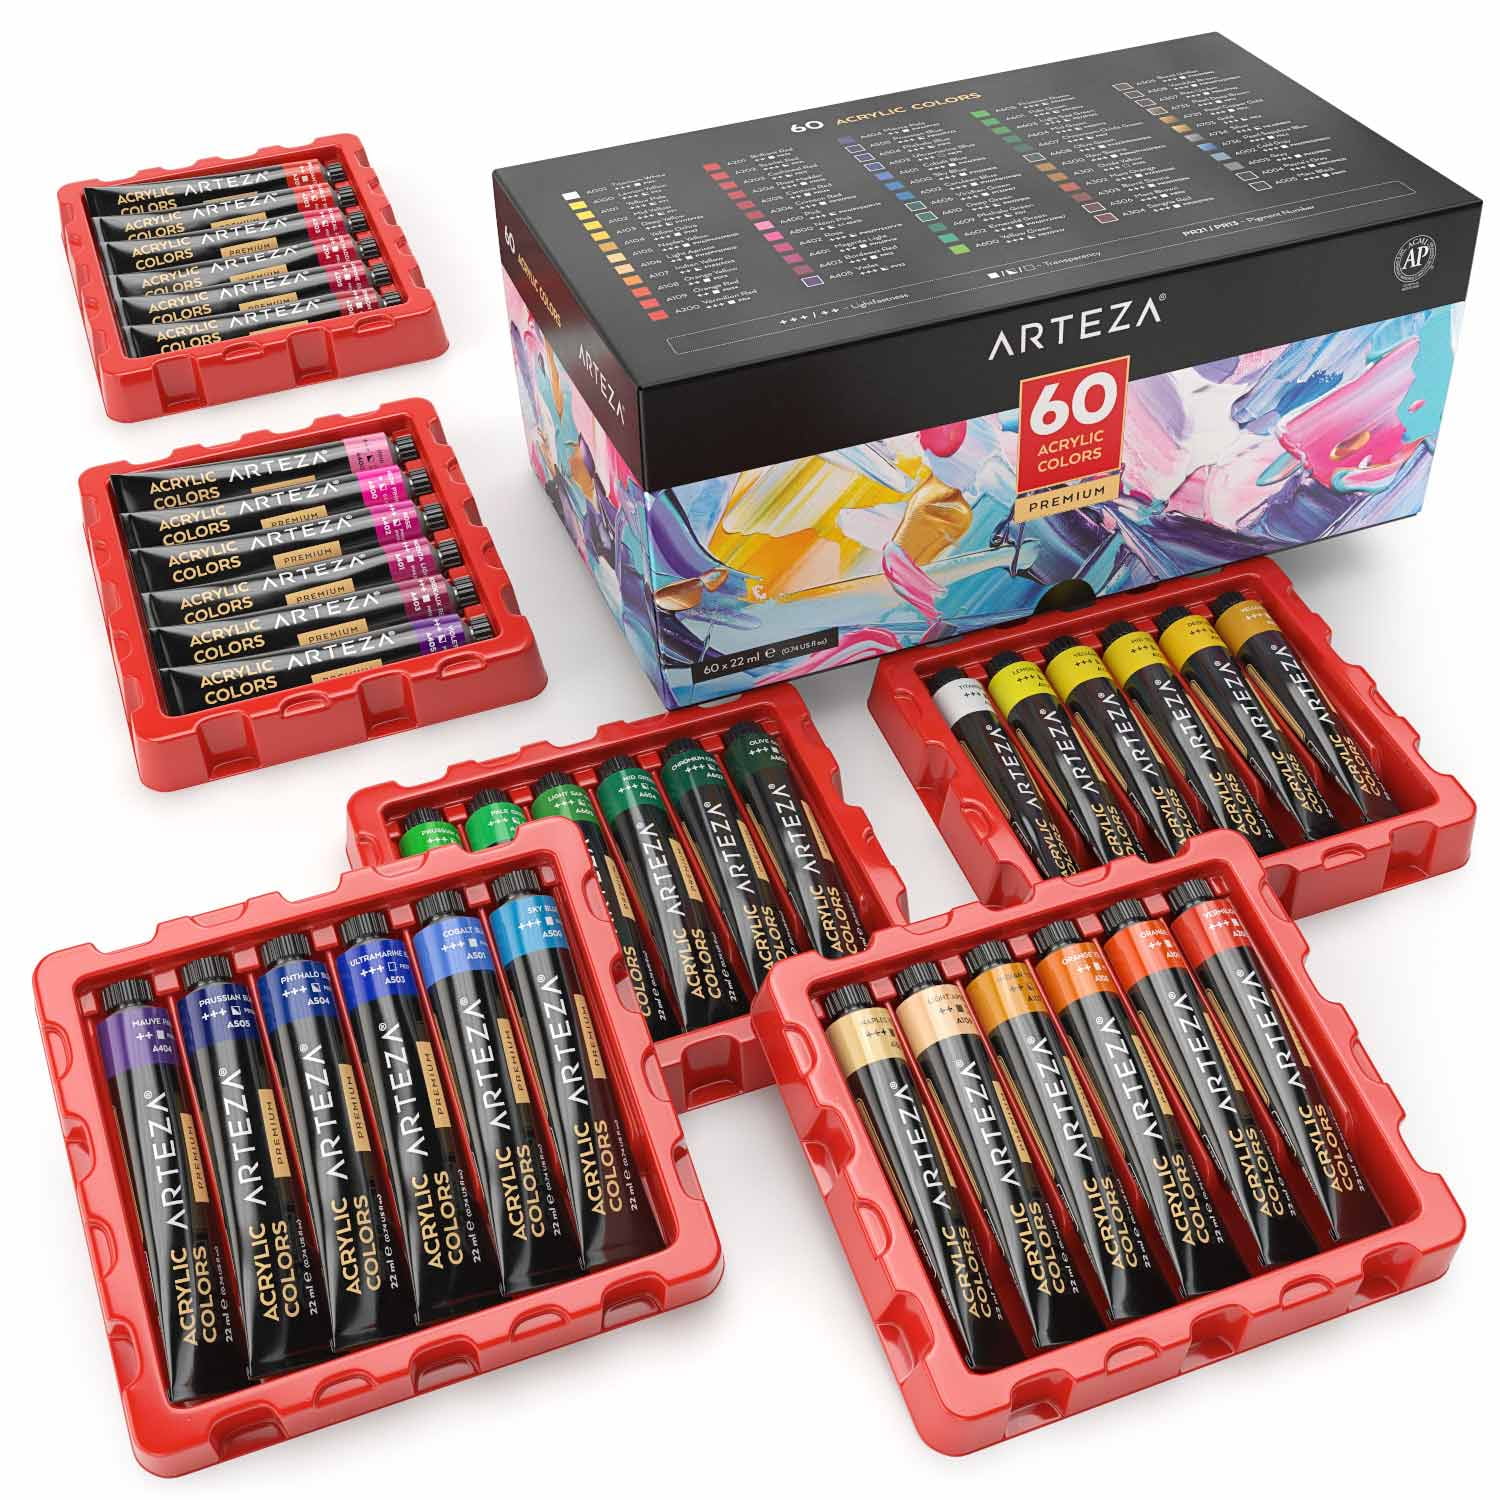 Acrylic Paint Set 18 colors/Tubes 2.5 oz (75 ml) - Basic Acrylic Paint Set  for Adults, Students, Beginners, Artists - Paints For Canvas Painting